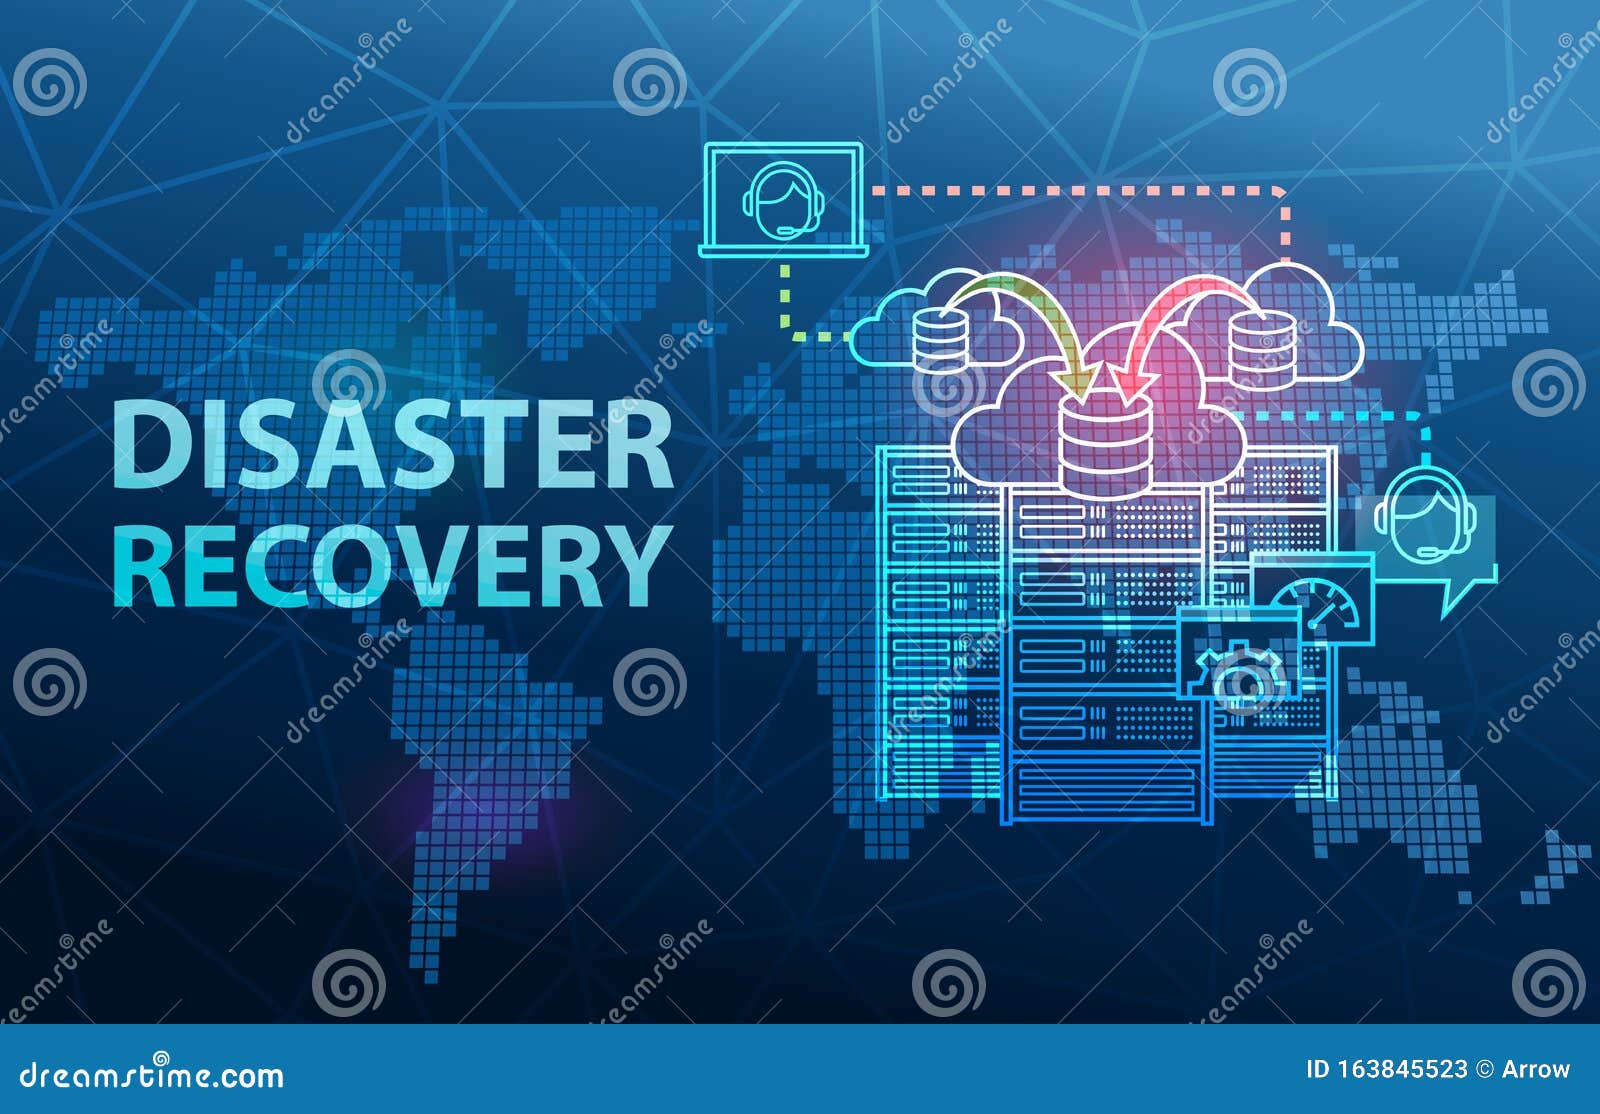 disaster recovery cloud server data loss prevention concept background